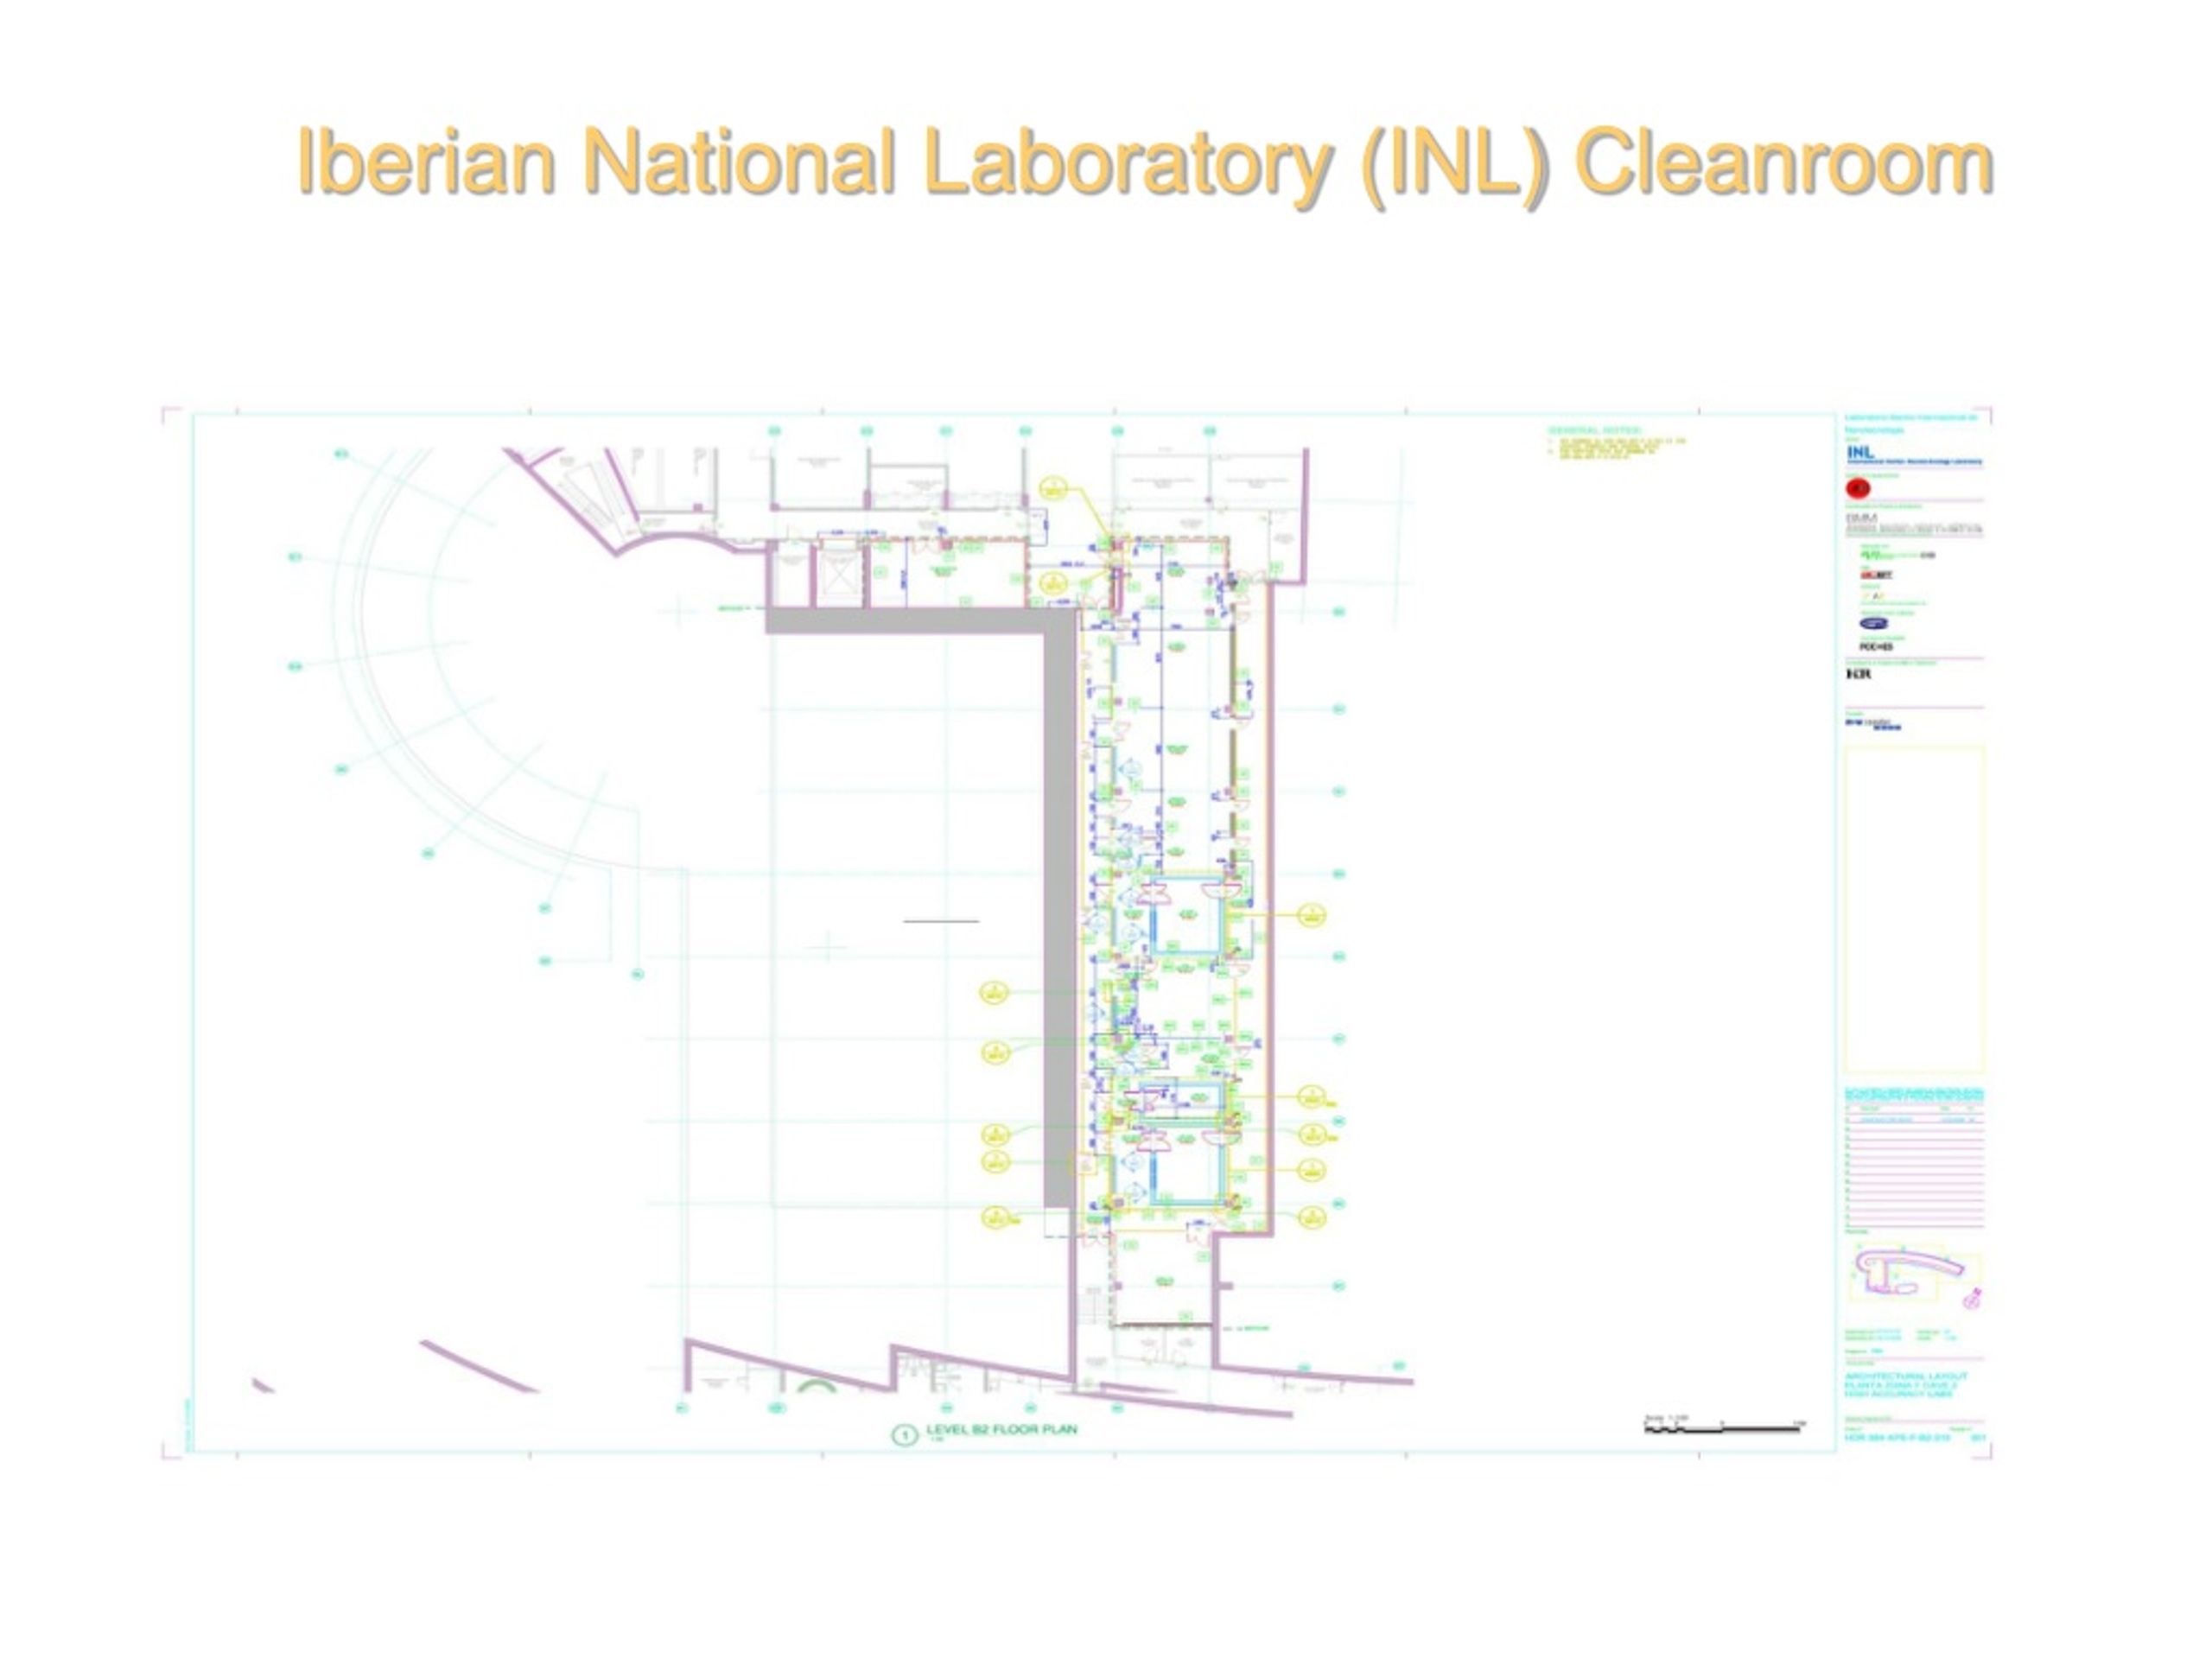 PPT - Nanotechnology Cleanroom Design Considerations ...